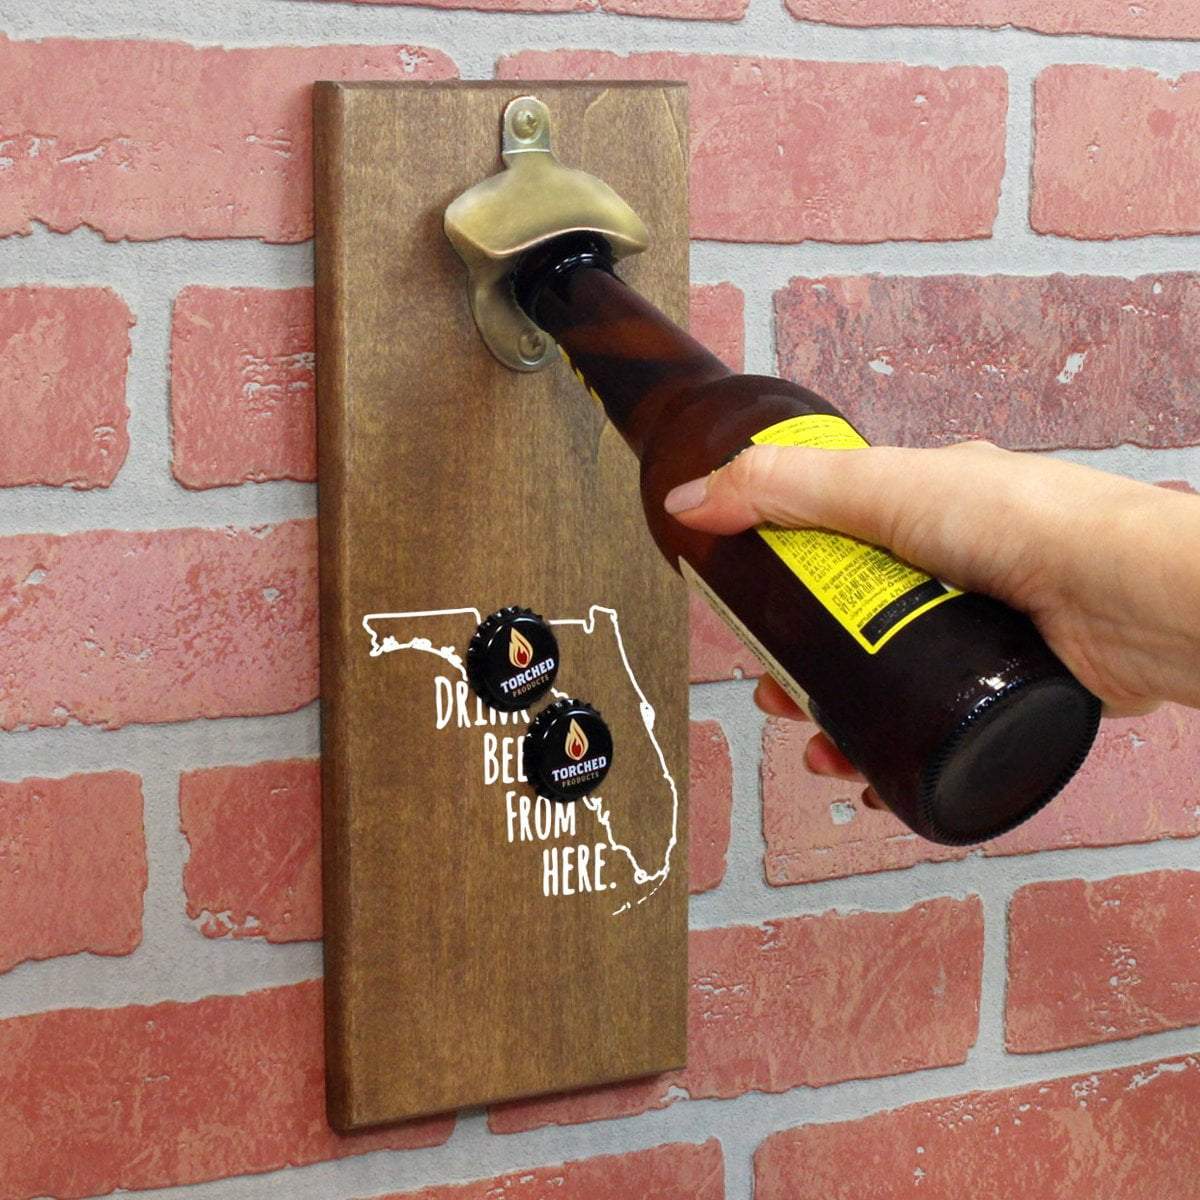 Torched Products Bottle Opener Default Title Florida Drink Beer From Here Cap Catching Magnetic Bottle Openers (781483802741)